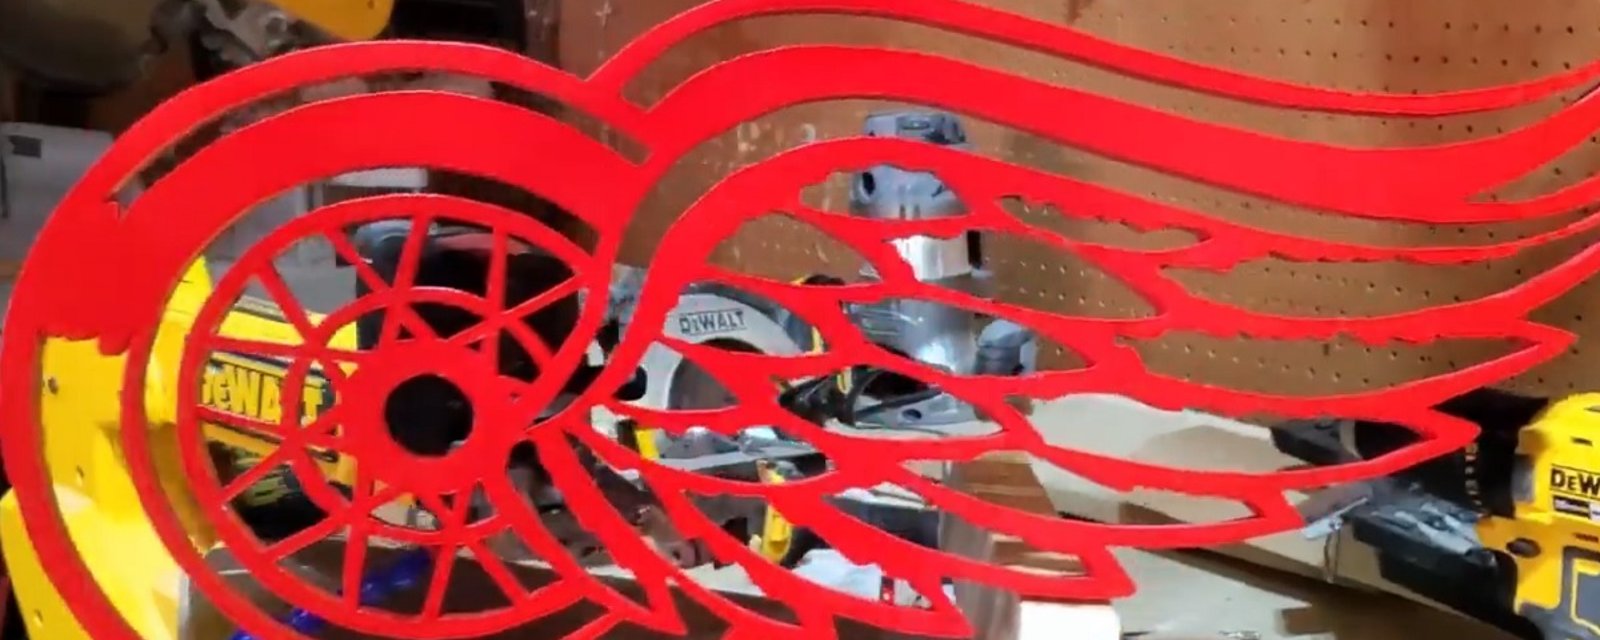 NHL fan crafts beautiful Red Wings logo, but has evil intentions.